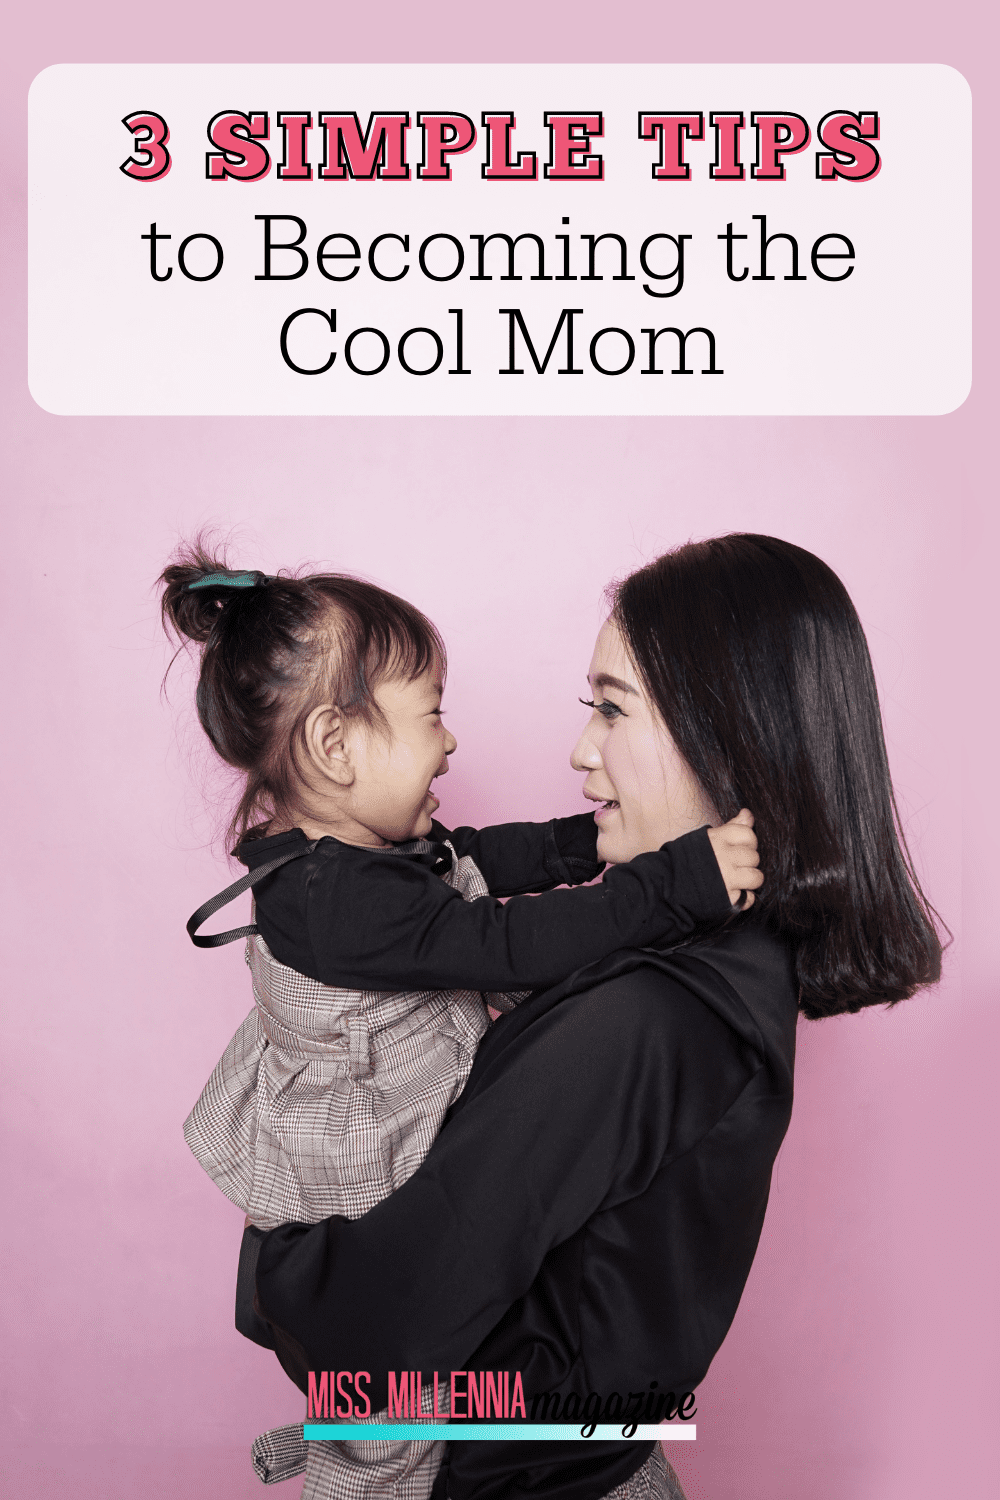 3 Simple Tips to Becoming the Cool Mom